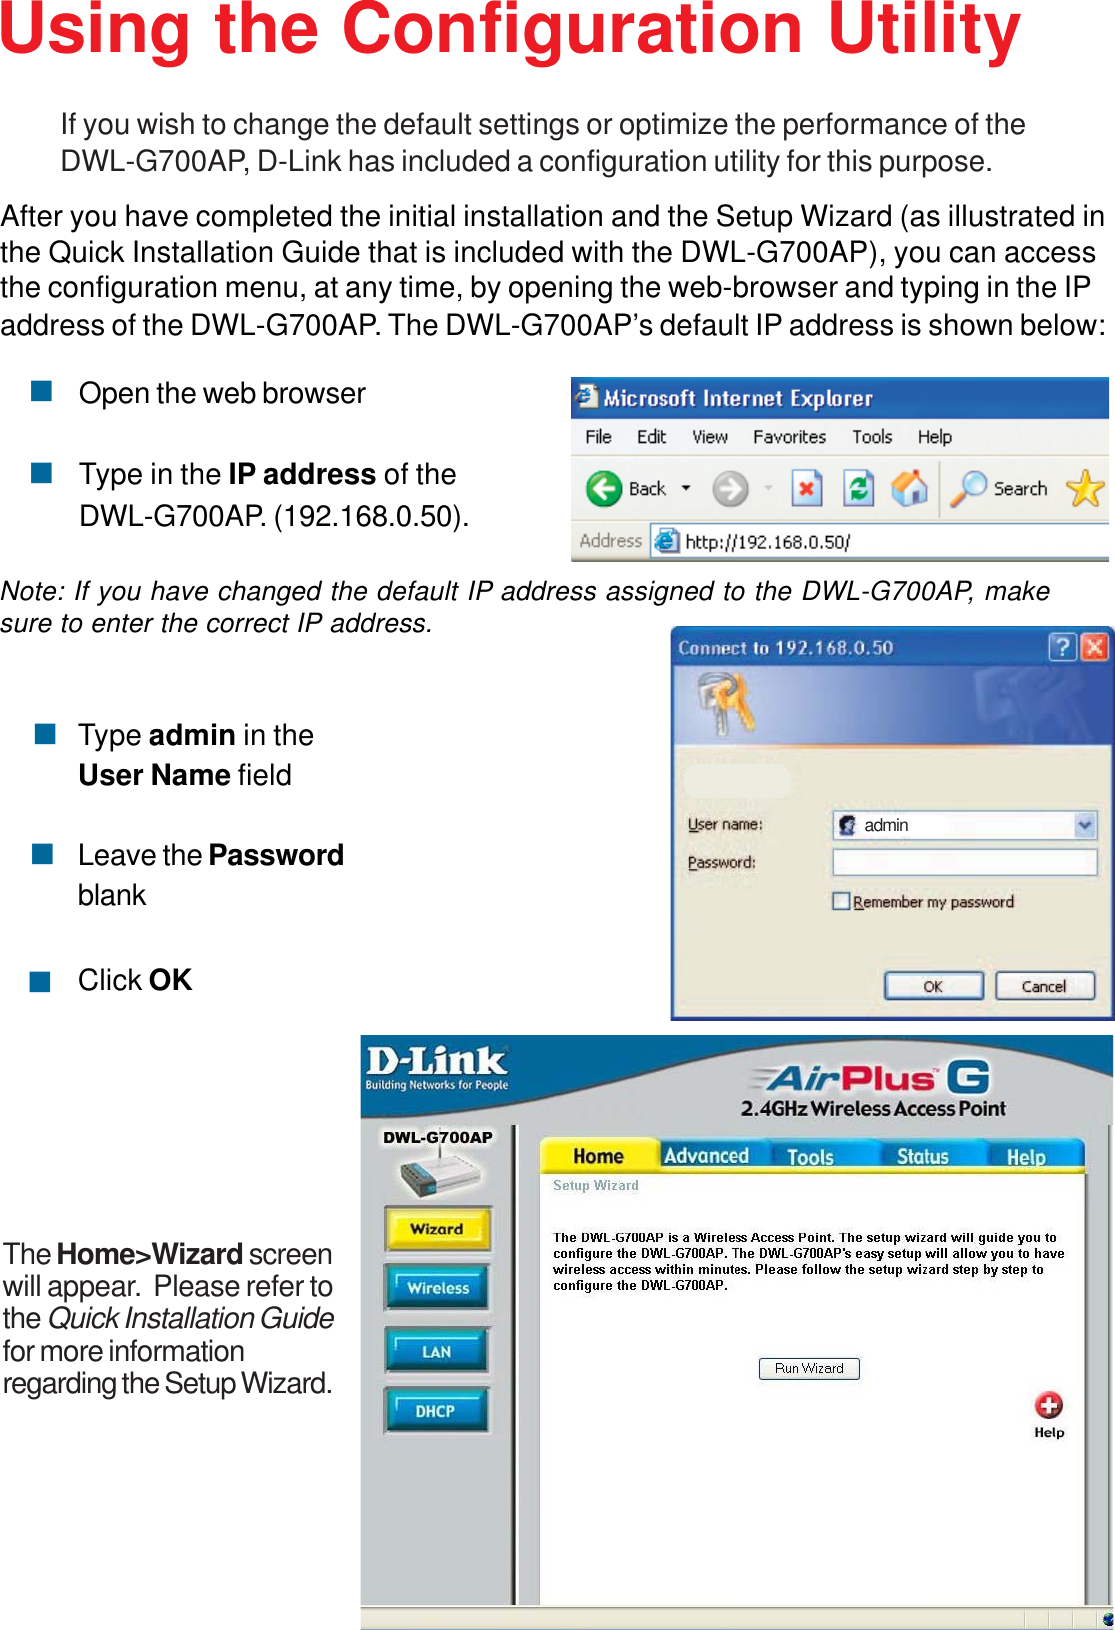 9After you have completed the initial installation and the Setup Wizard (as illustrated inthe Quick Installation Guide that is included with the DWL-G700AP), you can accessthe configuration menu, at any time, by opening the web-browser and typing in the IPaddress of the DWL-G700AP. The DWL-G700AP’s default IP address is shown below:Open the web browserType in the IP address of theDWL-G700AP. (192.168.0.50).Type admin in theUser Name fieldLeave the PasswordblankClick OKadminUsing the Configuration UtilityIf you wish to change the default settings or optimize the performance of theDWL-G700AP, D-Link has included a configuration utility for this purpose.Note: If you have changed the default IP address assigned to the DWL-G700AP, makesure to enter the correct IP address.The Home&gt;Wizard screenwill appear.  Please refer tothe Quick Installation Guidefor more informationregarding the Setup Wizard.